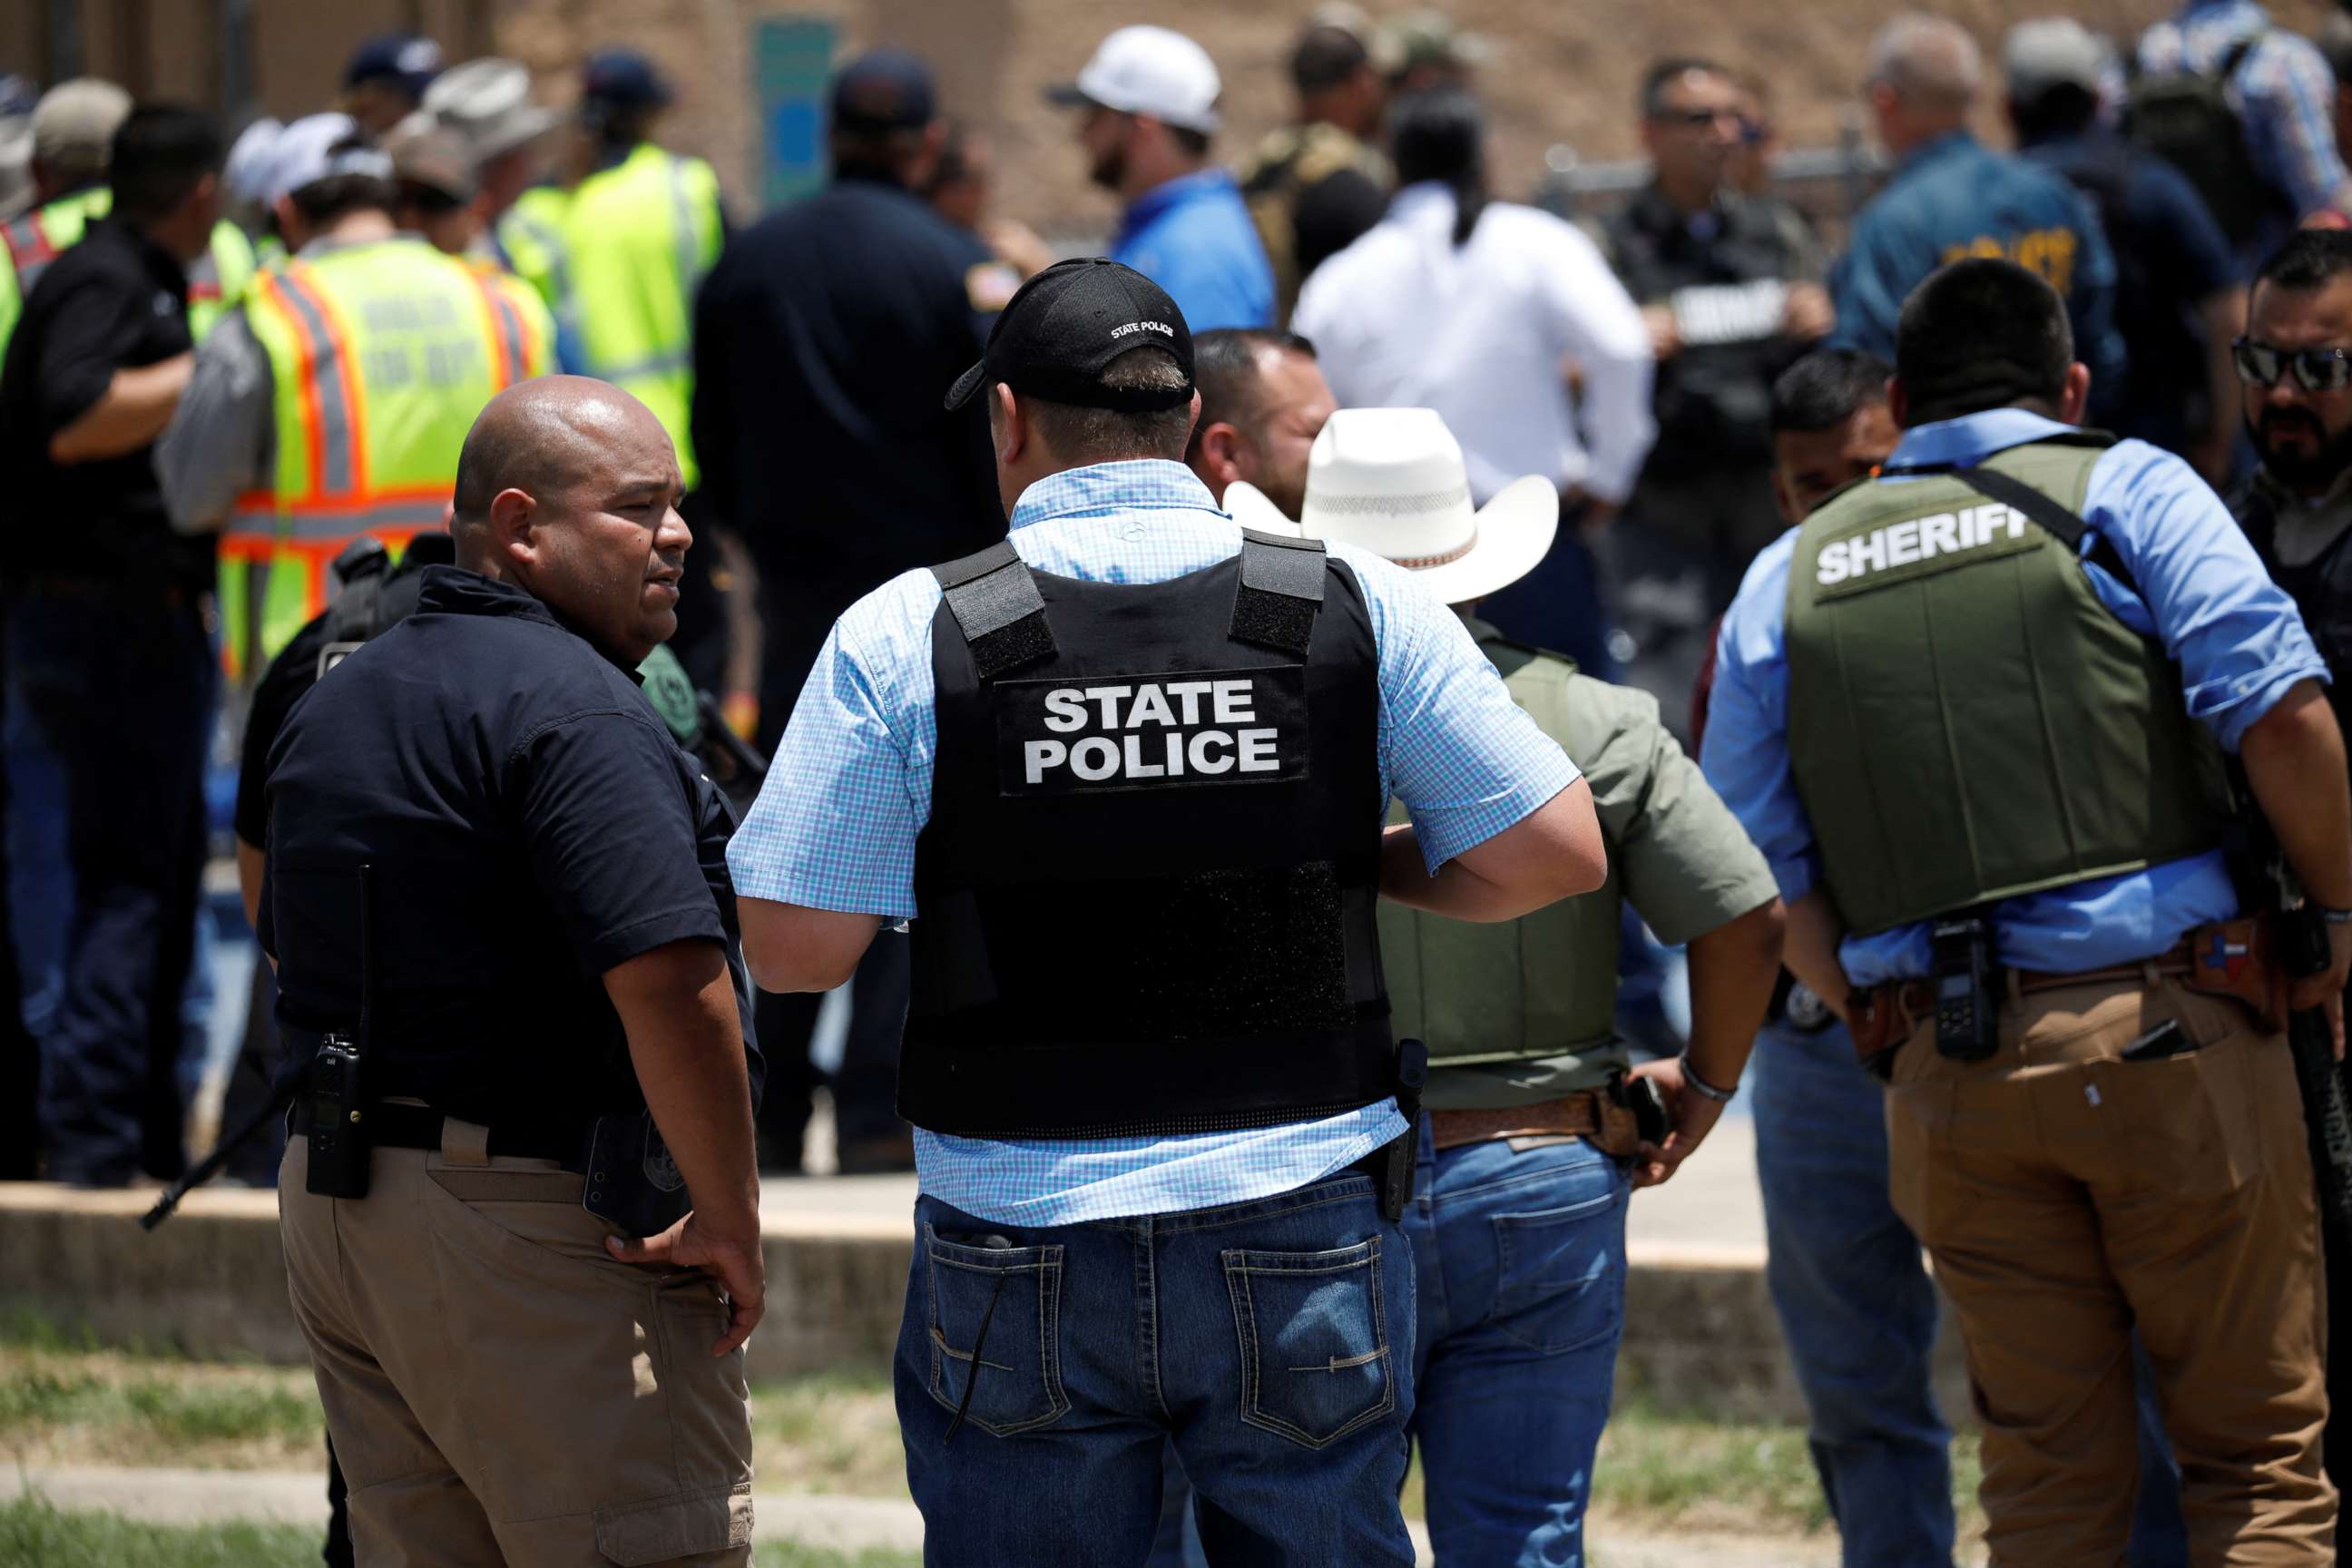 PHOTO: Law enforcement personnel guard the scene of a suspected shooting near Robb Elementary School in Uvalde, Texas, May 24, 2022.